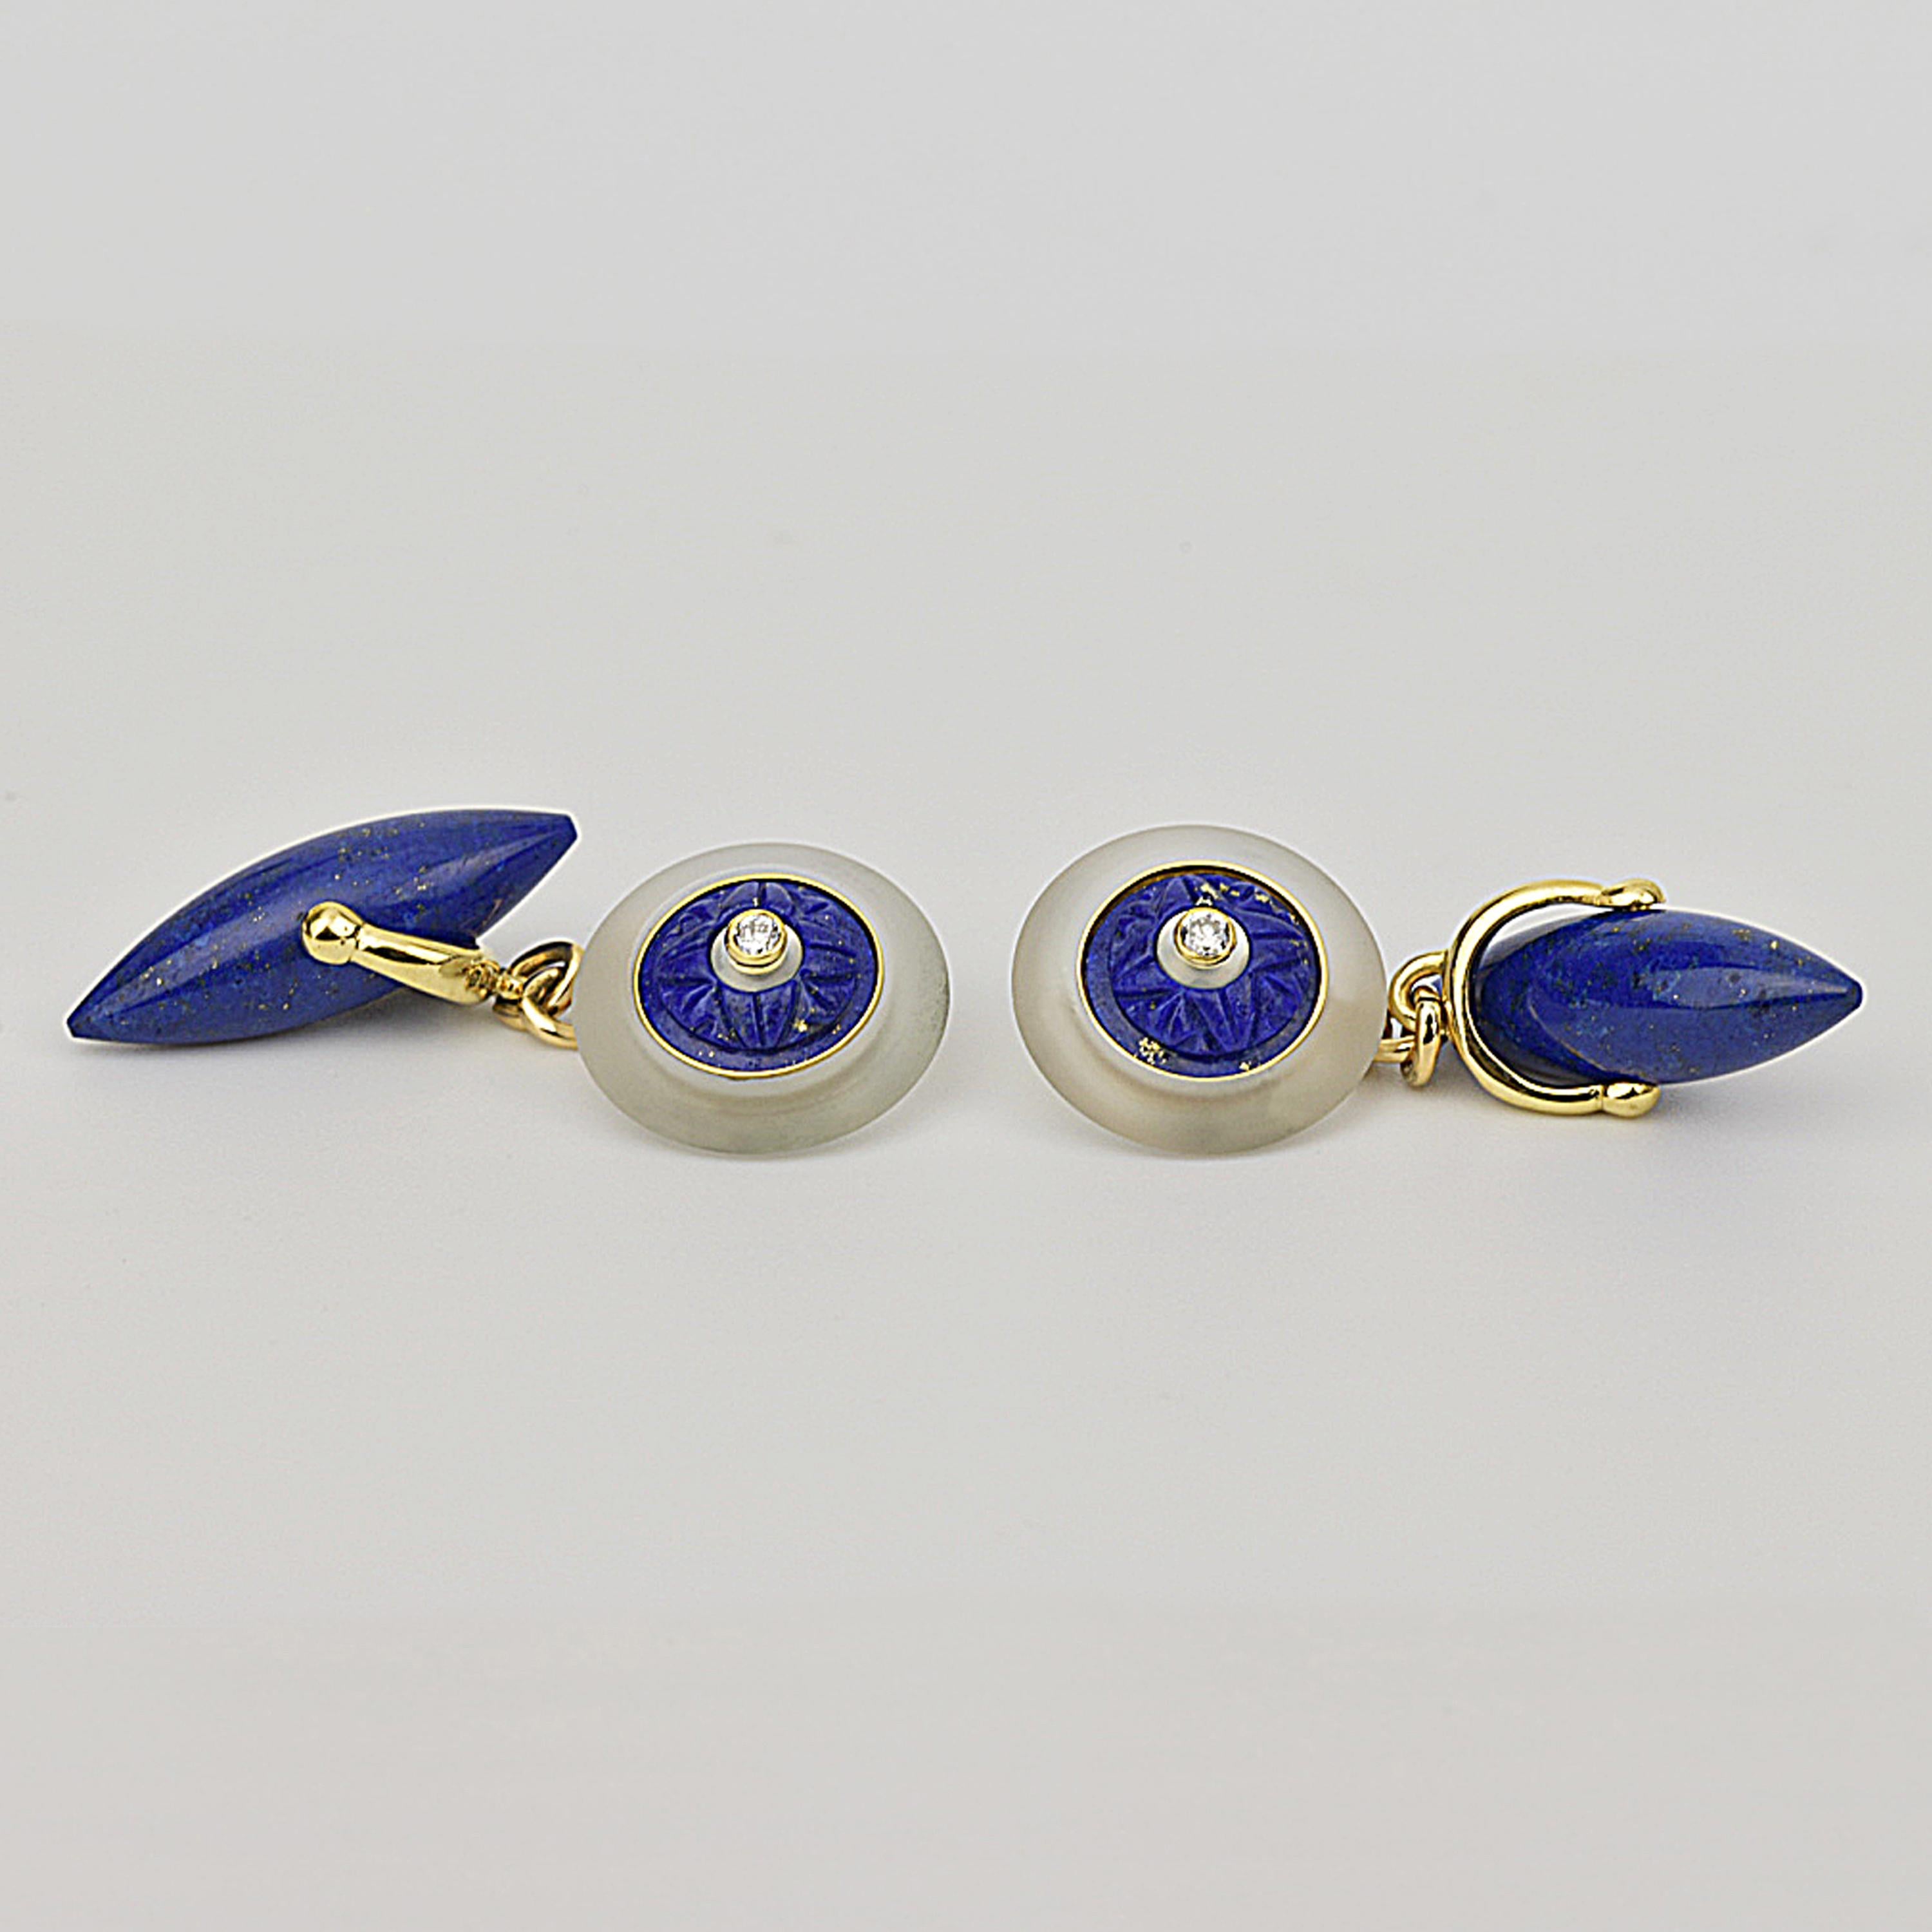 Matthew Cambery 18K yellow gold and white gold rock crystal cufflinks set with a central diamond surrounded by a ring of mother-of-pearl and further embellished with a section of carved lapis lazuli. Chain connecting cufflinks with a lapis lazuli